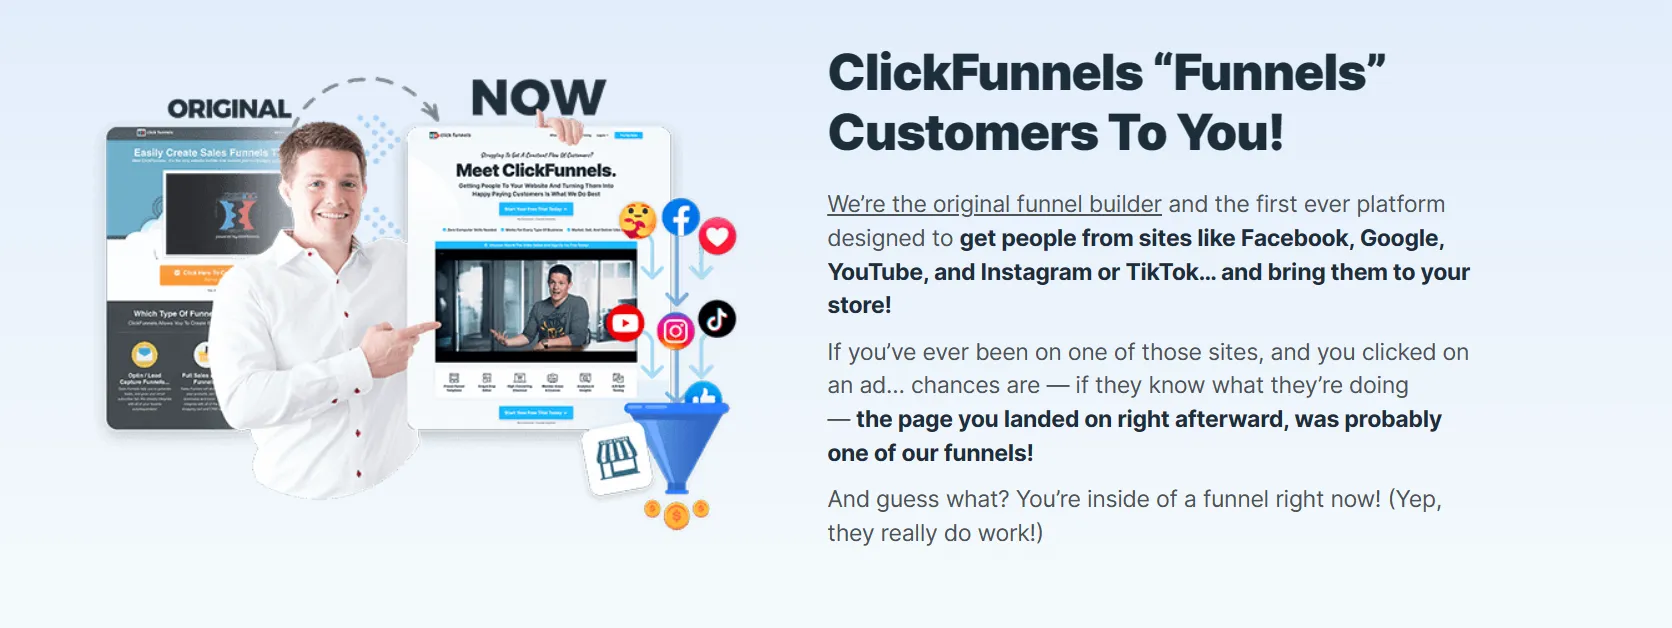 ClickFunnels Easy To Use & Intuitive